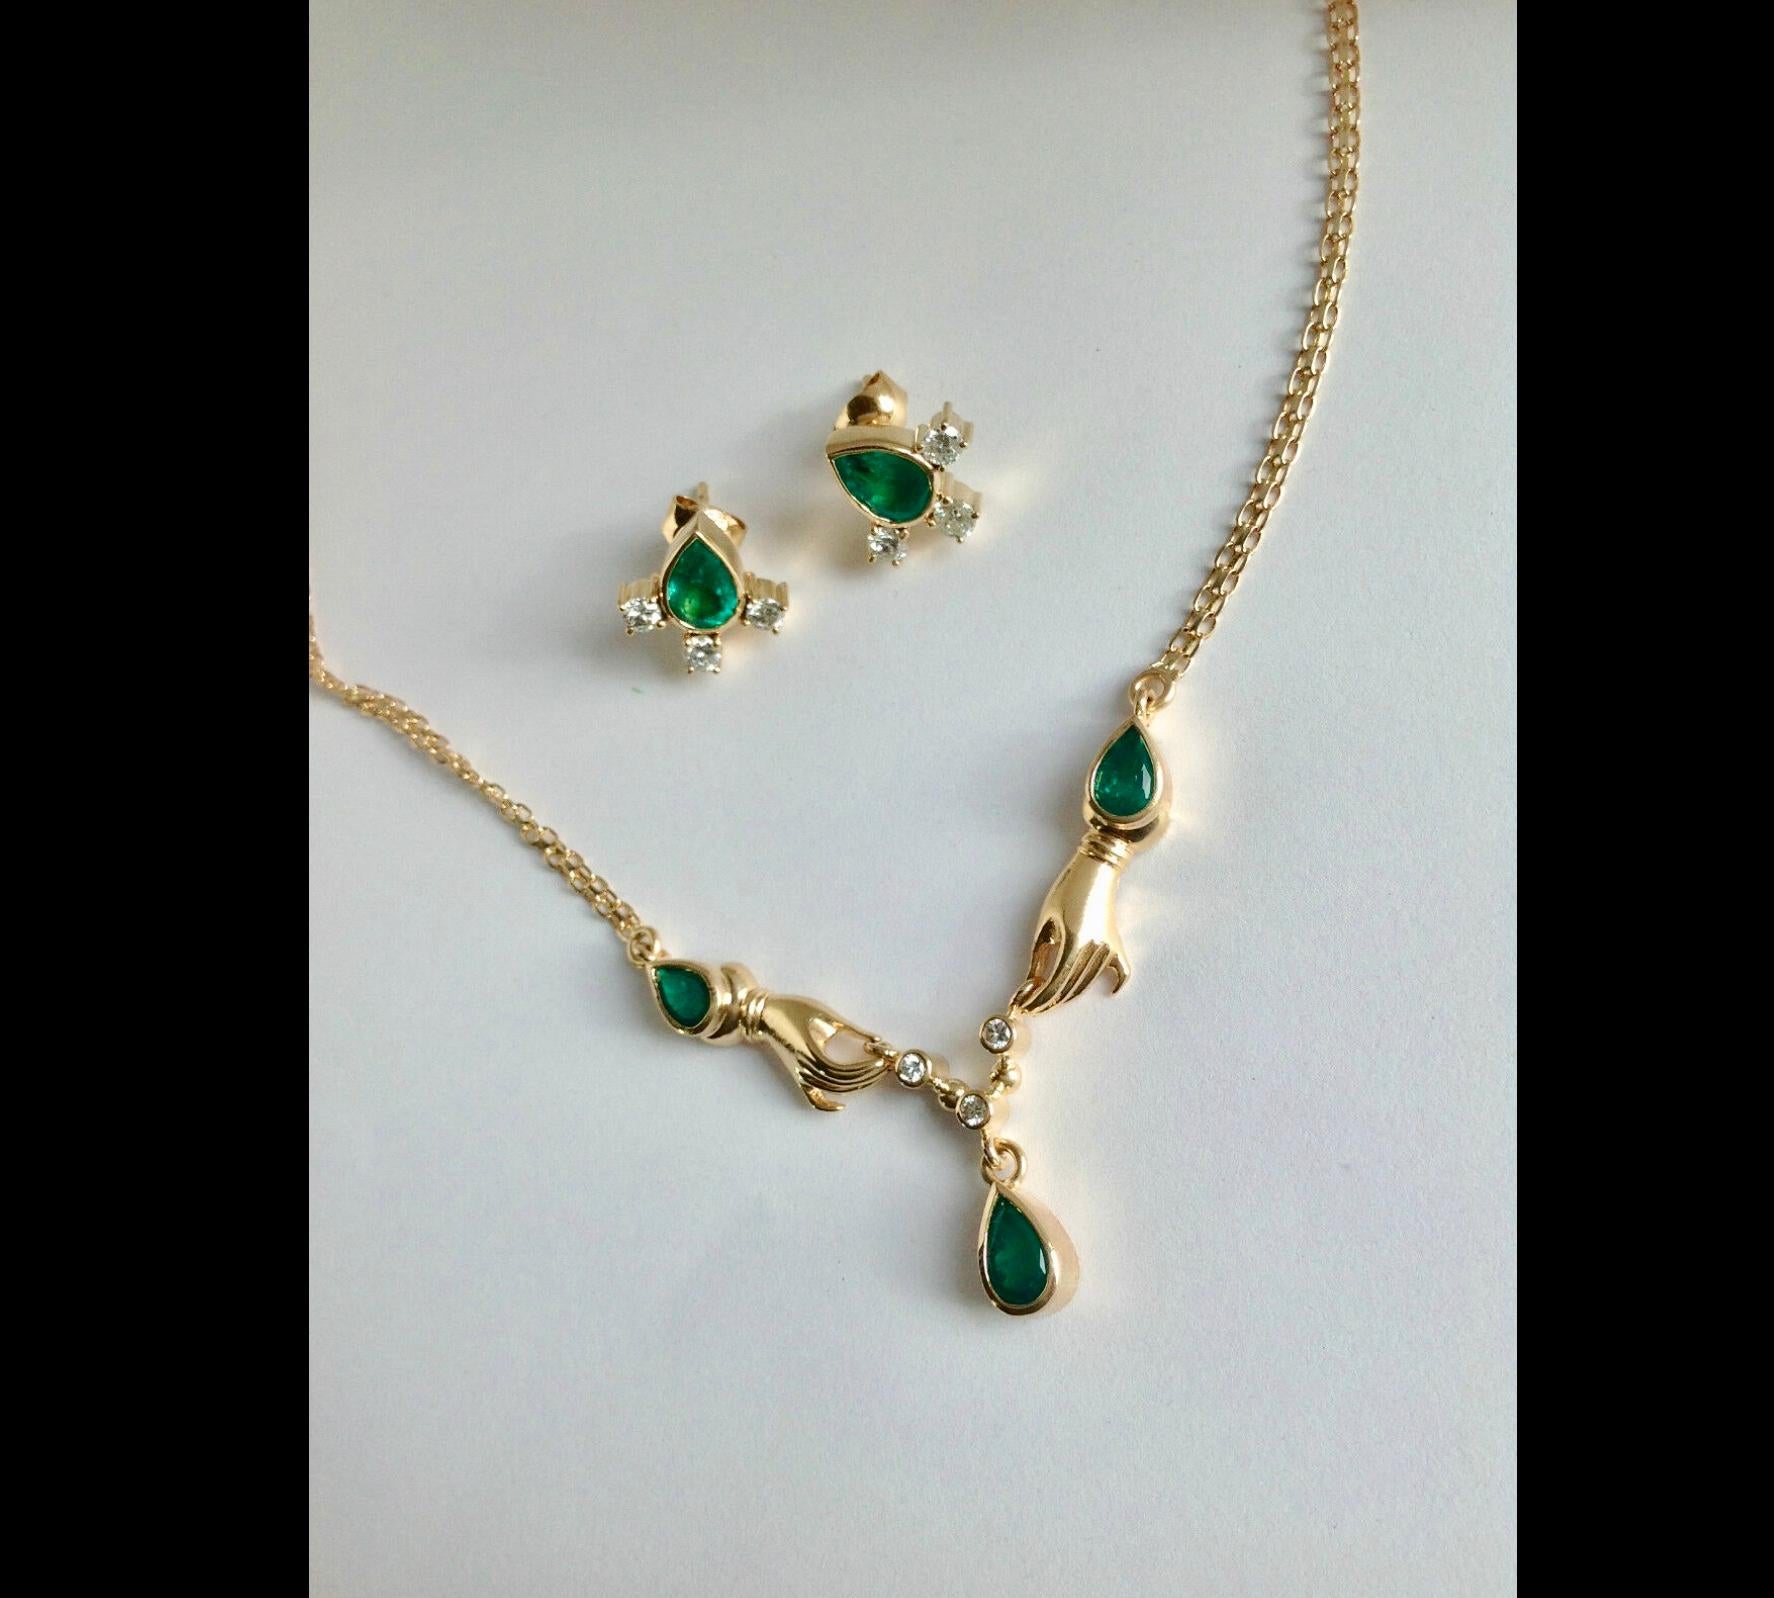 FINE COLOMBIAN EMERALD &  DIAMOND LADY HANDS PENDANT NECKLACE
Fine Quality Colombian emeralds and diamonds. This Incredible hands AAA emerald and diamond necklace is custom made solid 18k yellow gold. The necklace feature three natural Colombian